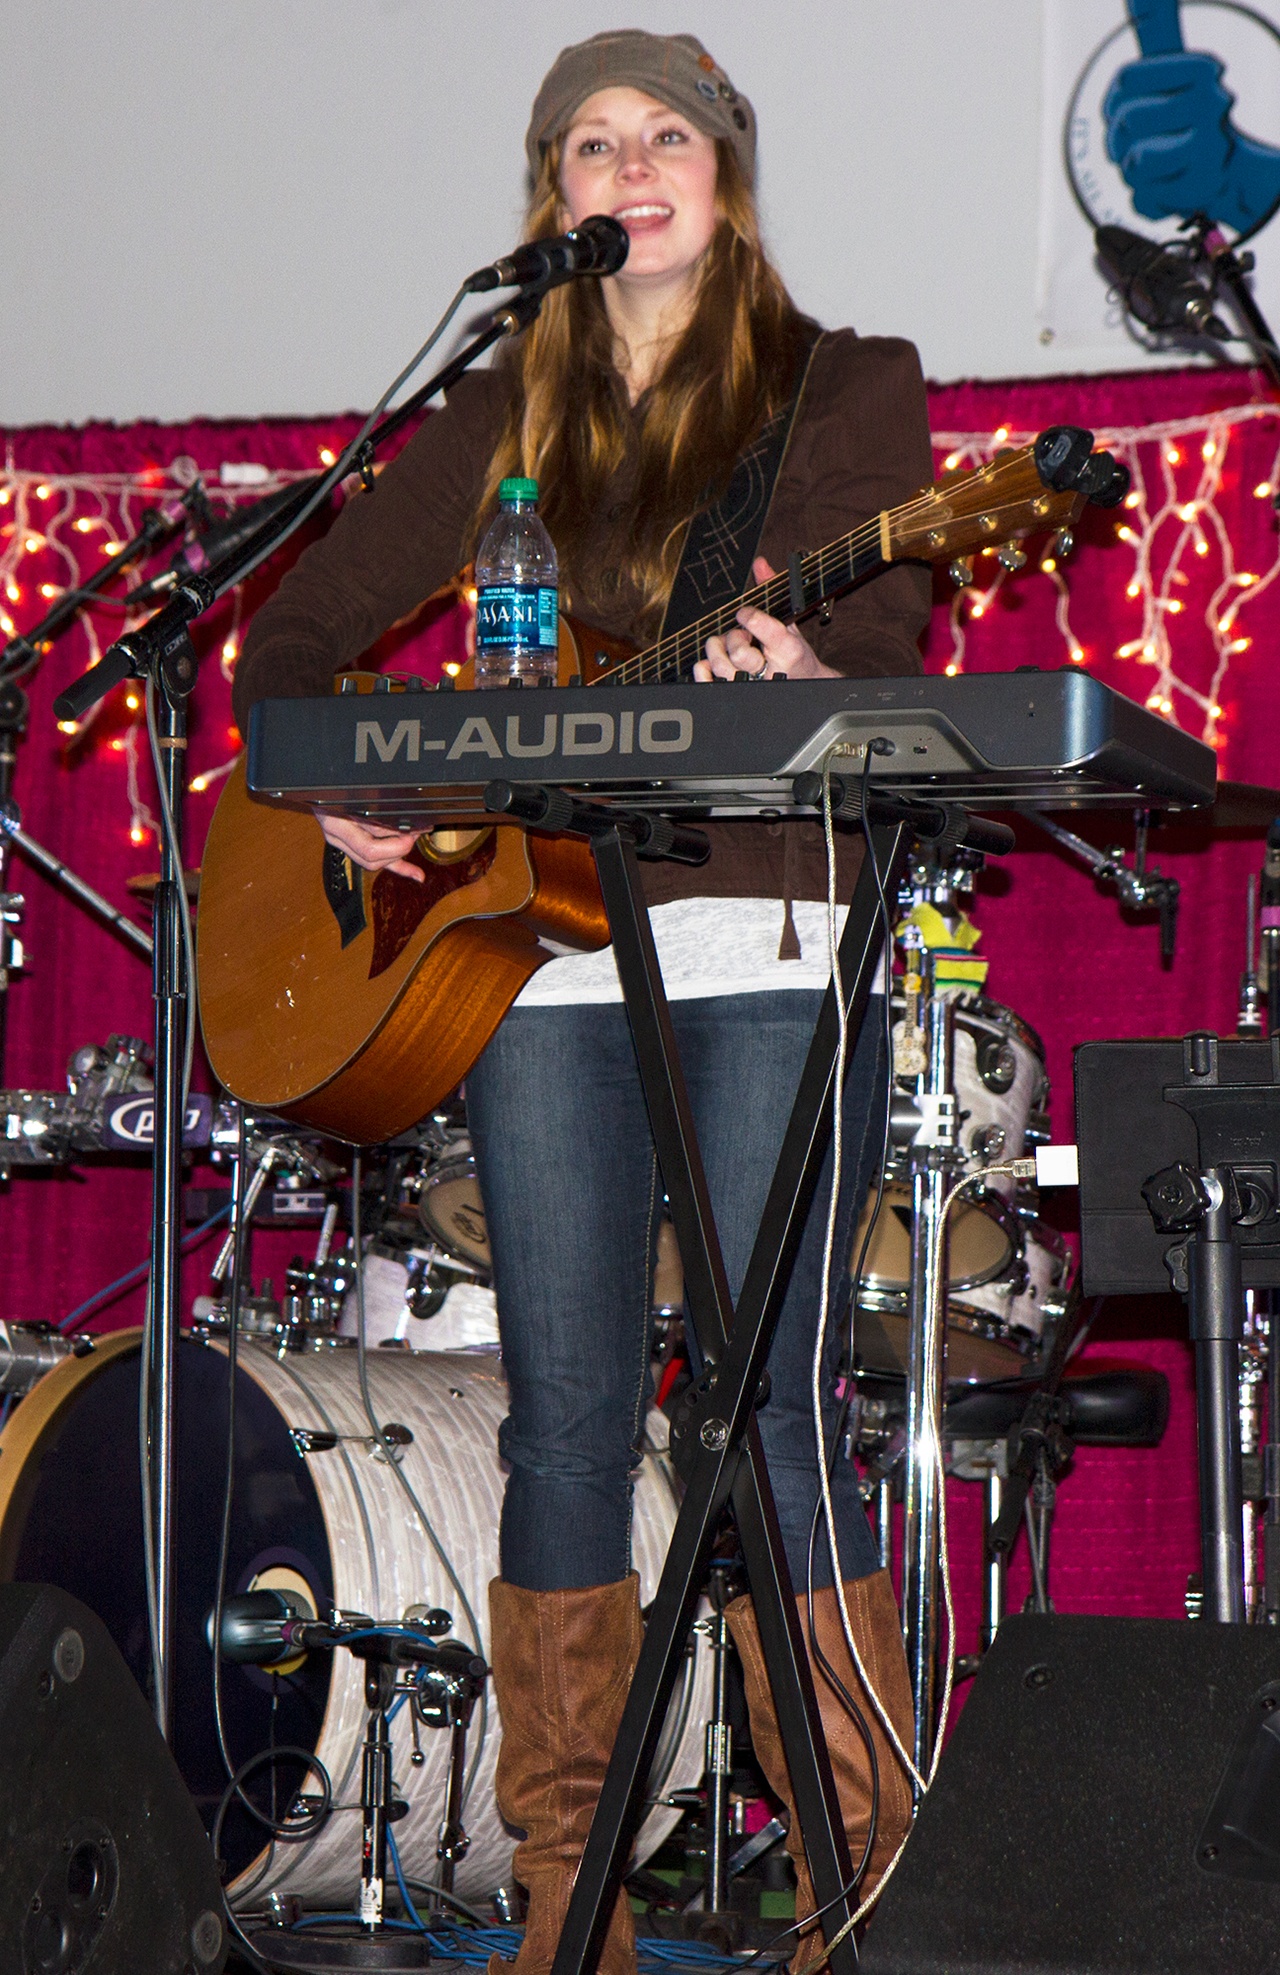 Ericka Corban performs at the 2016 Winter Wine Festival in Elma.                                (Grays Harbor Newspaper Group file photo)